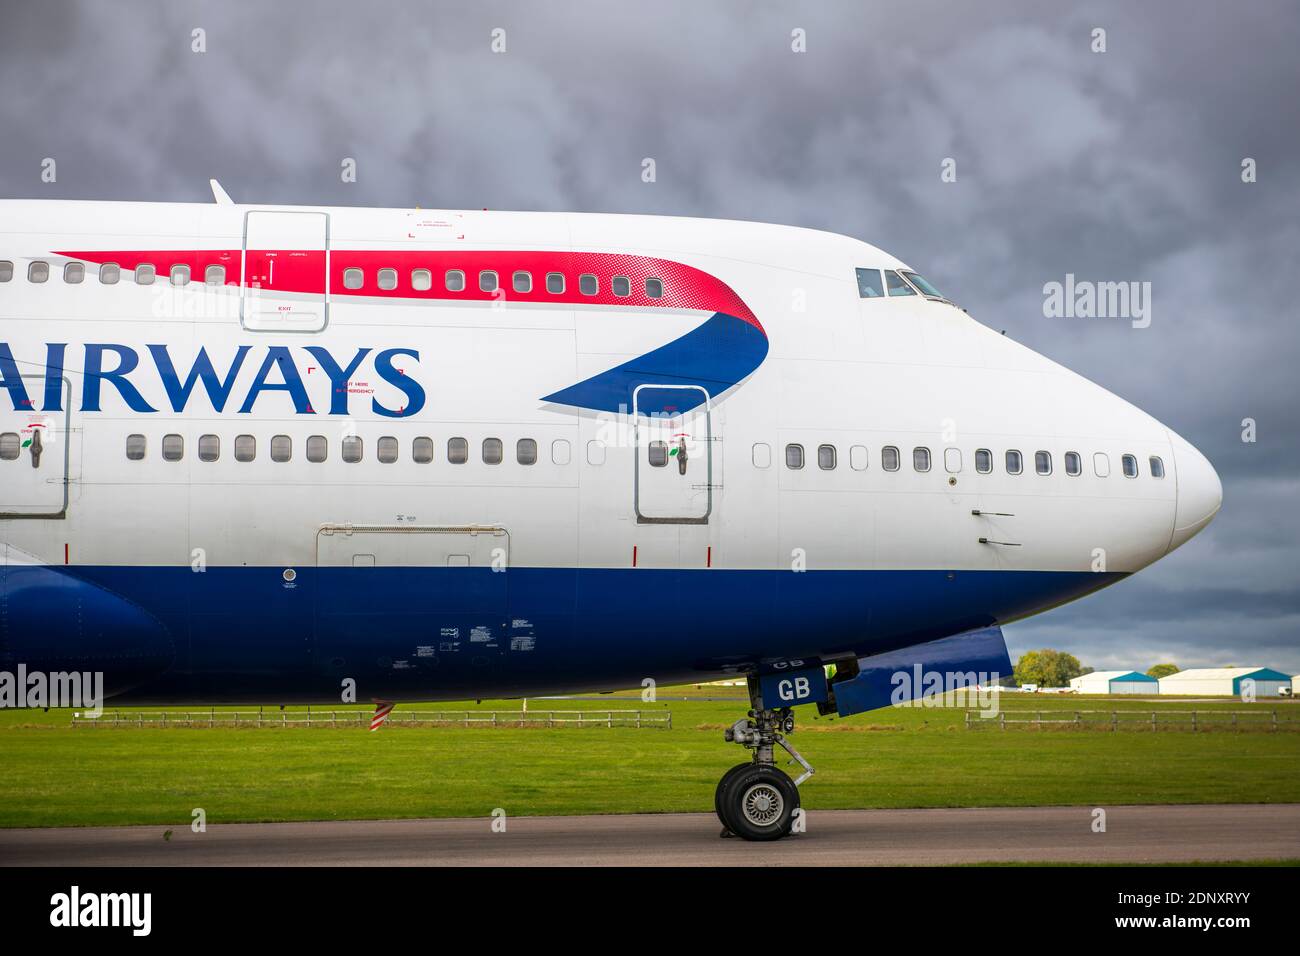 Storm clouds gather over the final resting place of the iconic British Airways Boeing 747 'Jumbo Jet' fleet as they wait on the tarmac to be scrapped Stock Photo